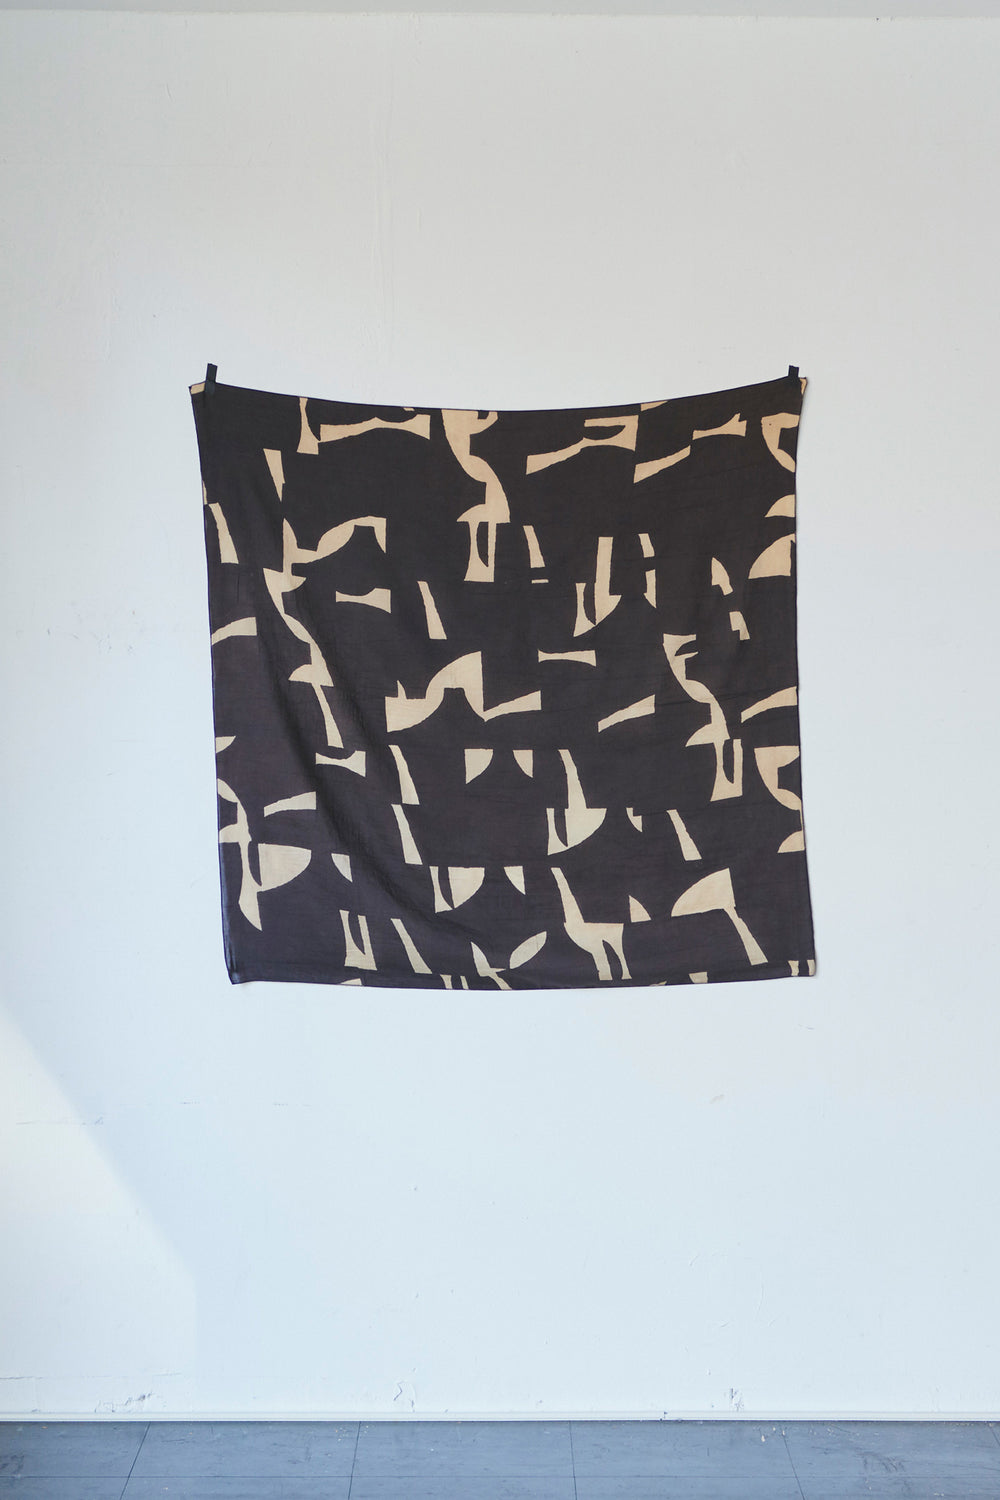 Abstract Black Scarf